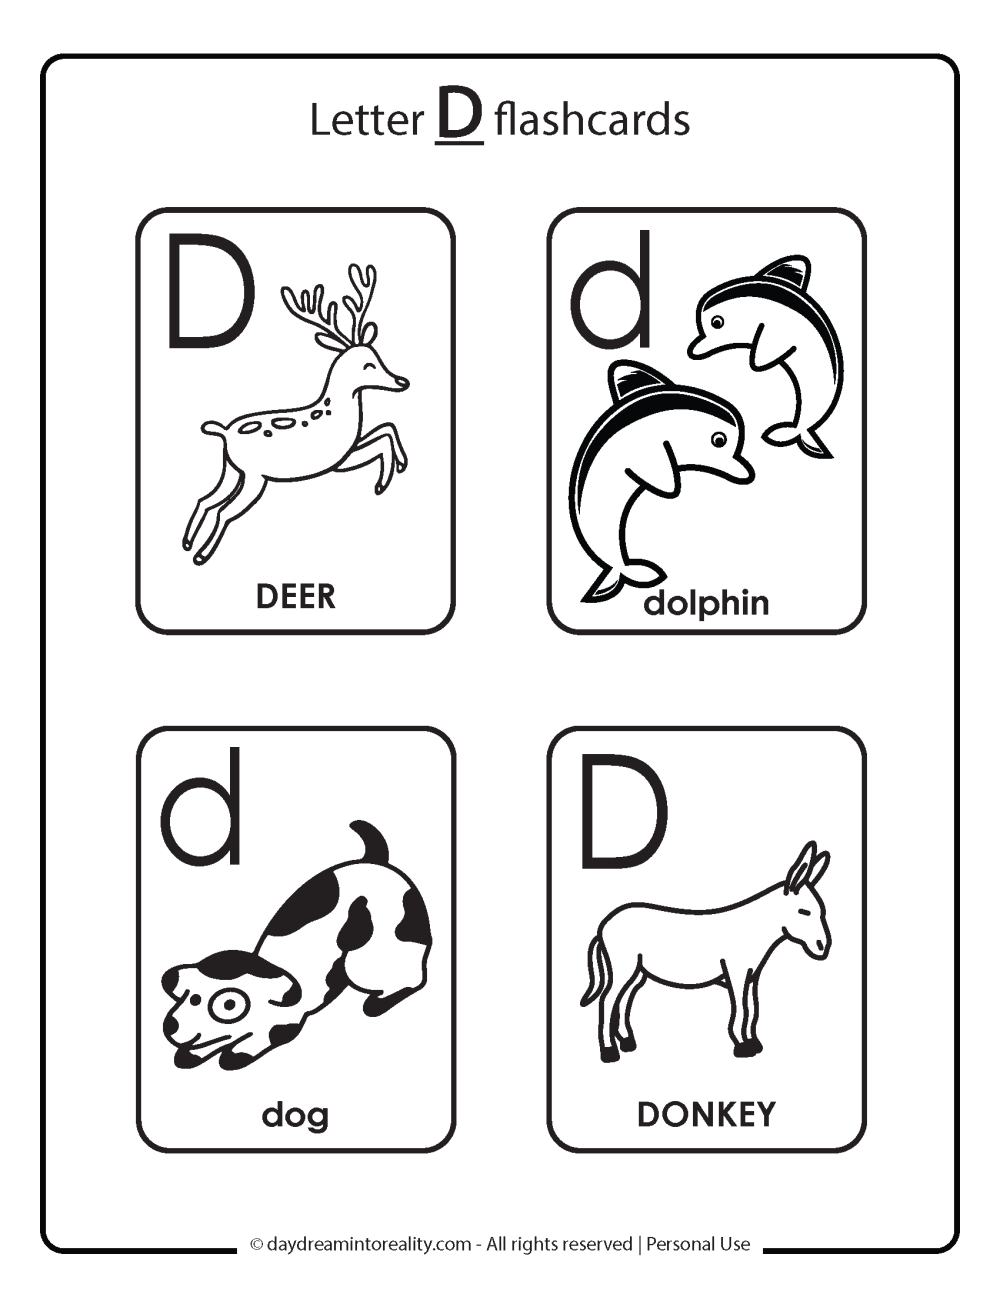 Flashcards Letter D free printable.